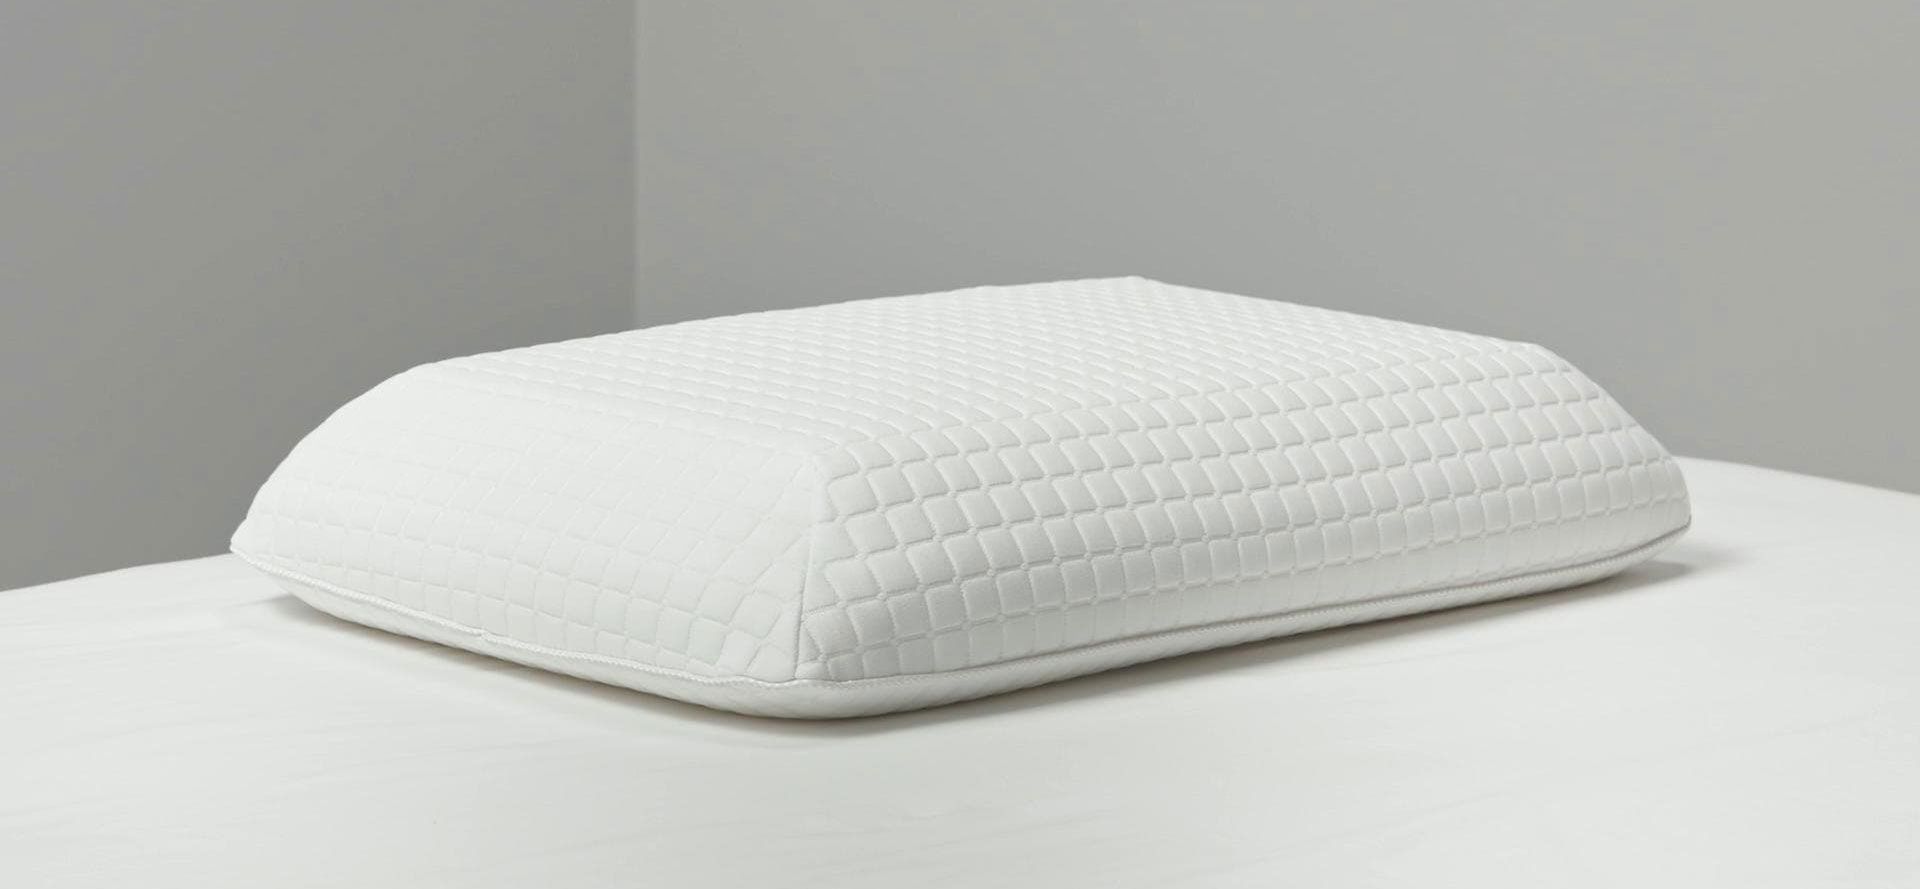 Pillow Height For Back Sleepers.